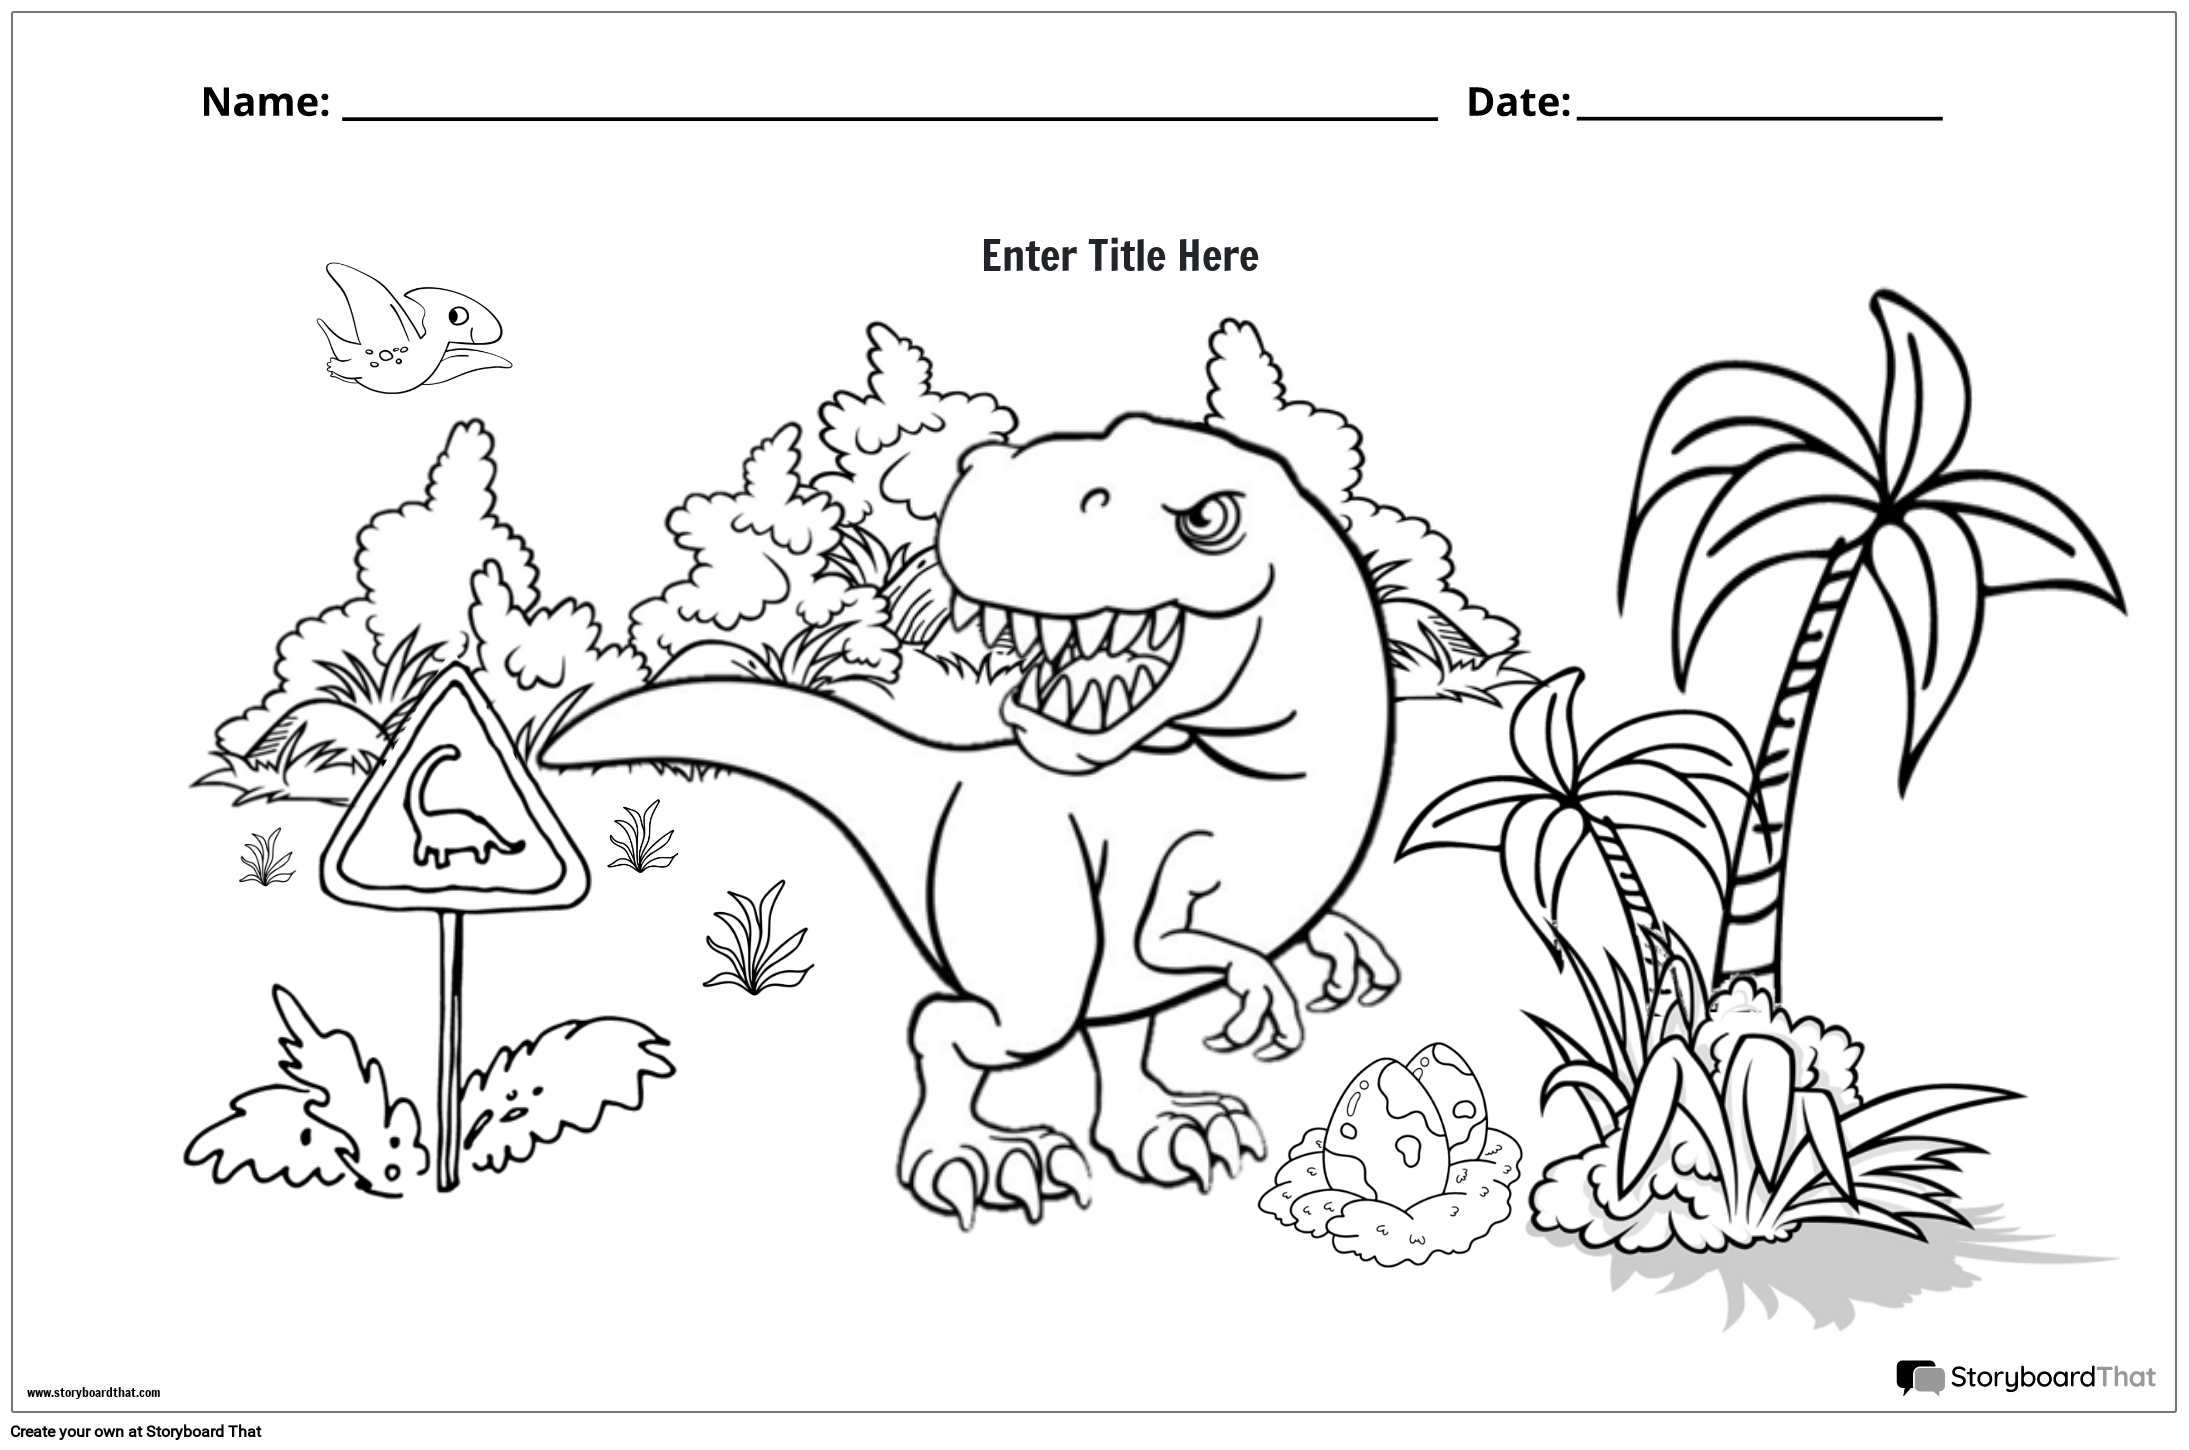 Dinosaur-themed Coloring Page 